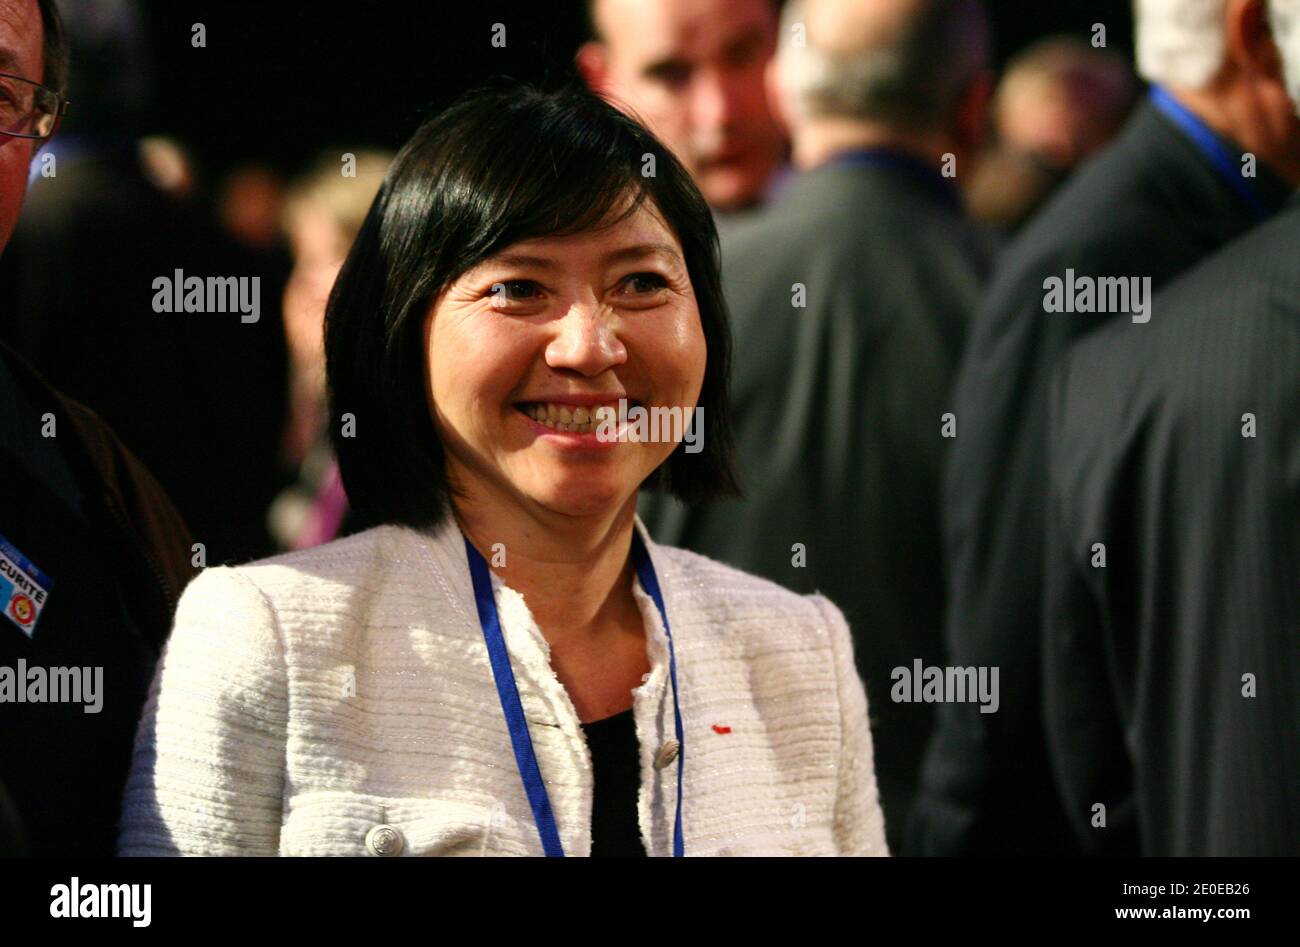 The foster daughter of former French President Jacques Chirac's Anh Dao Traxel during the meeting of the France's incumbent President and right-wing ruling party Union for a Popular Movement candidate for the French 2012 presidential election Nicolas Sarkozy in Bompas, near Perpignan, south of France on April 14, 2012. Photo by Michel Clementz/ABACAPRESS.COM Stock Photo